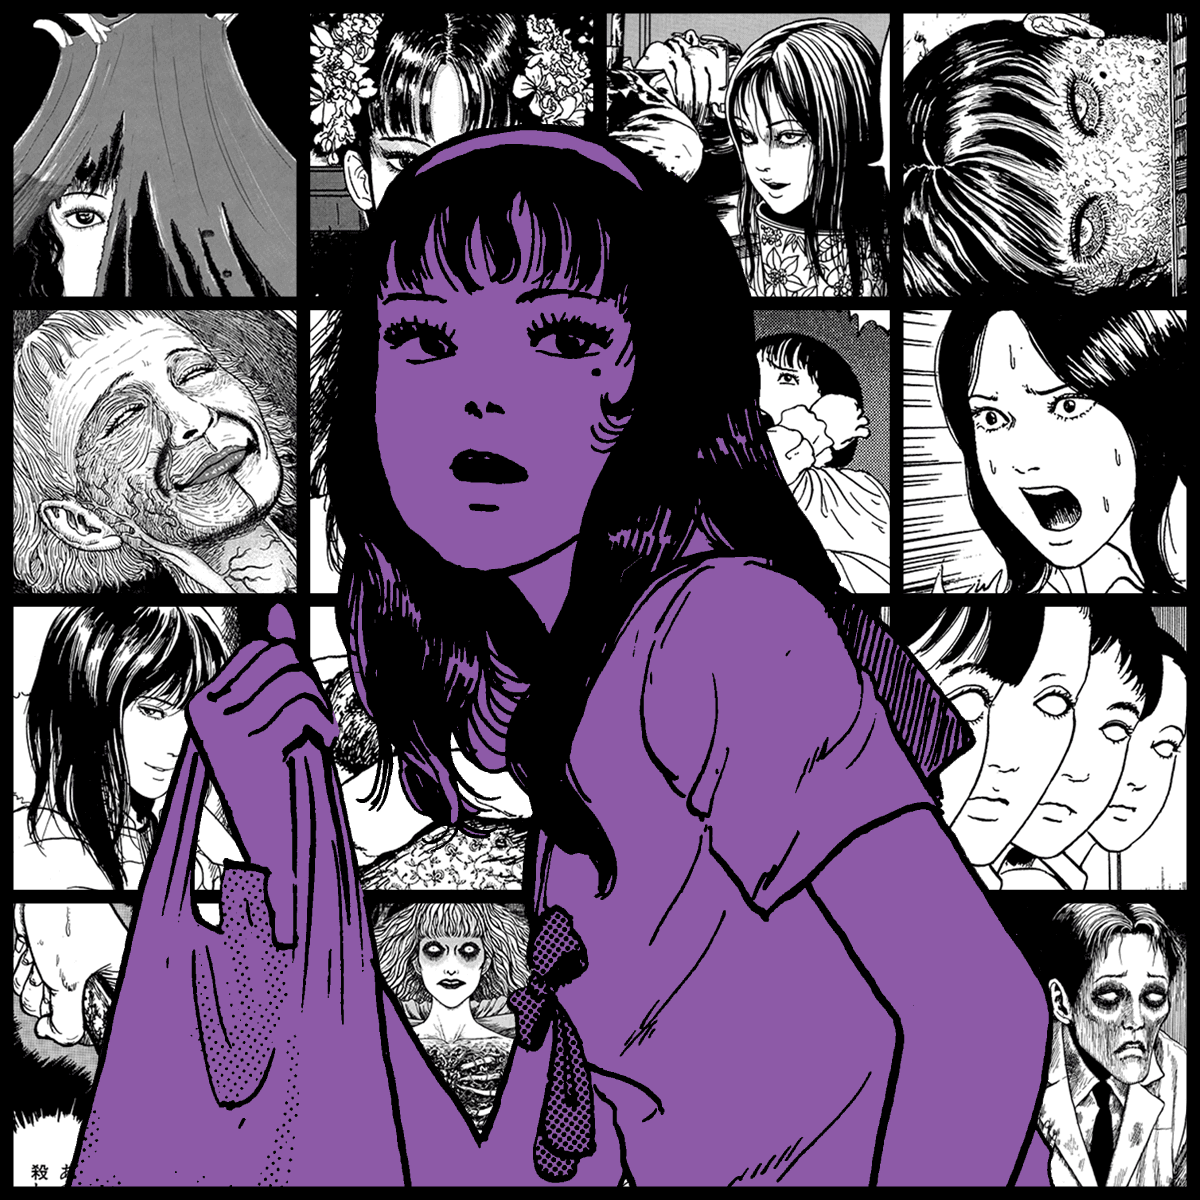 TOMIE by Junji Ito #407